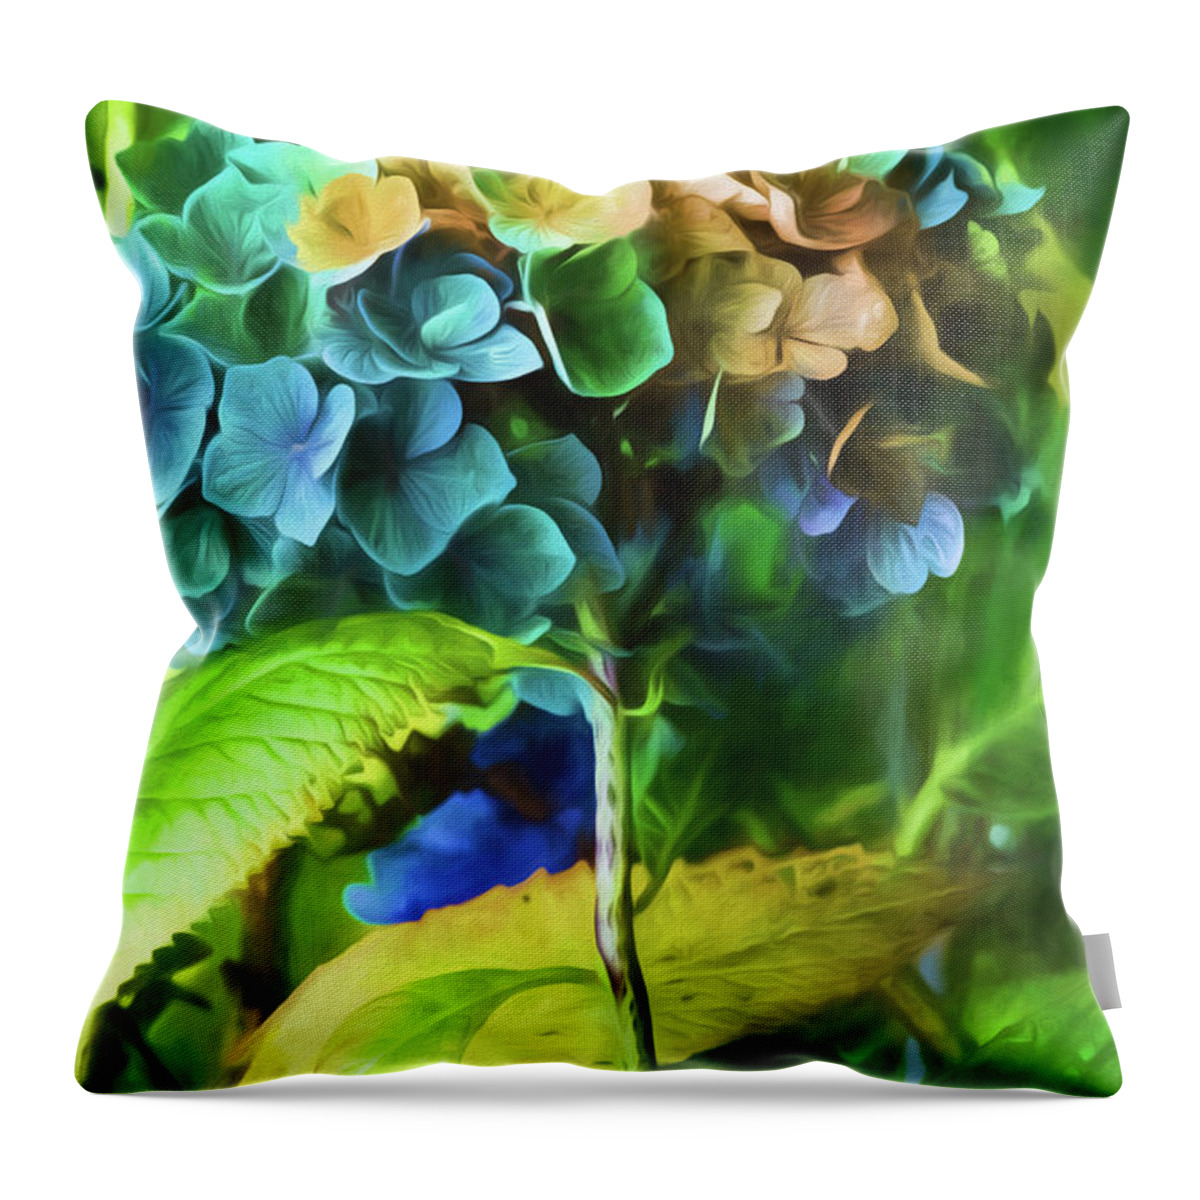 Painterly Throw Pillow featuring the painting Hydrangeas by Bonnie Bruno